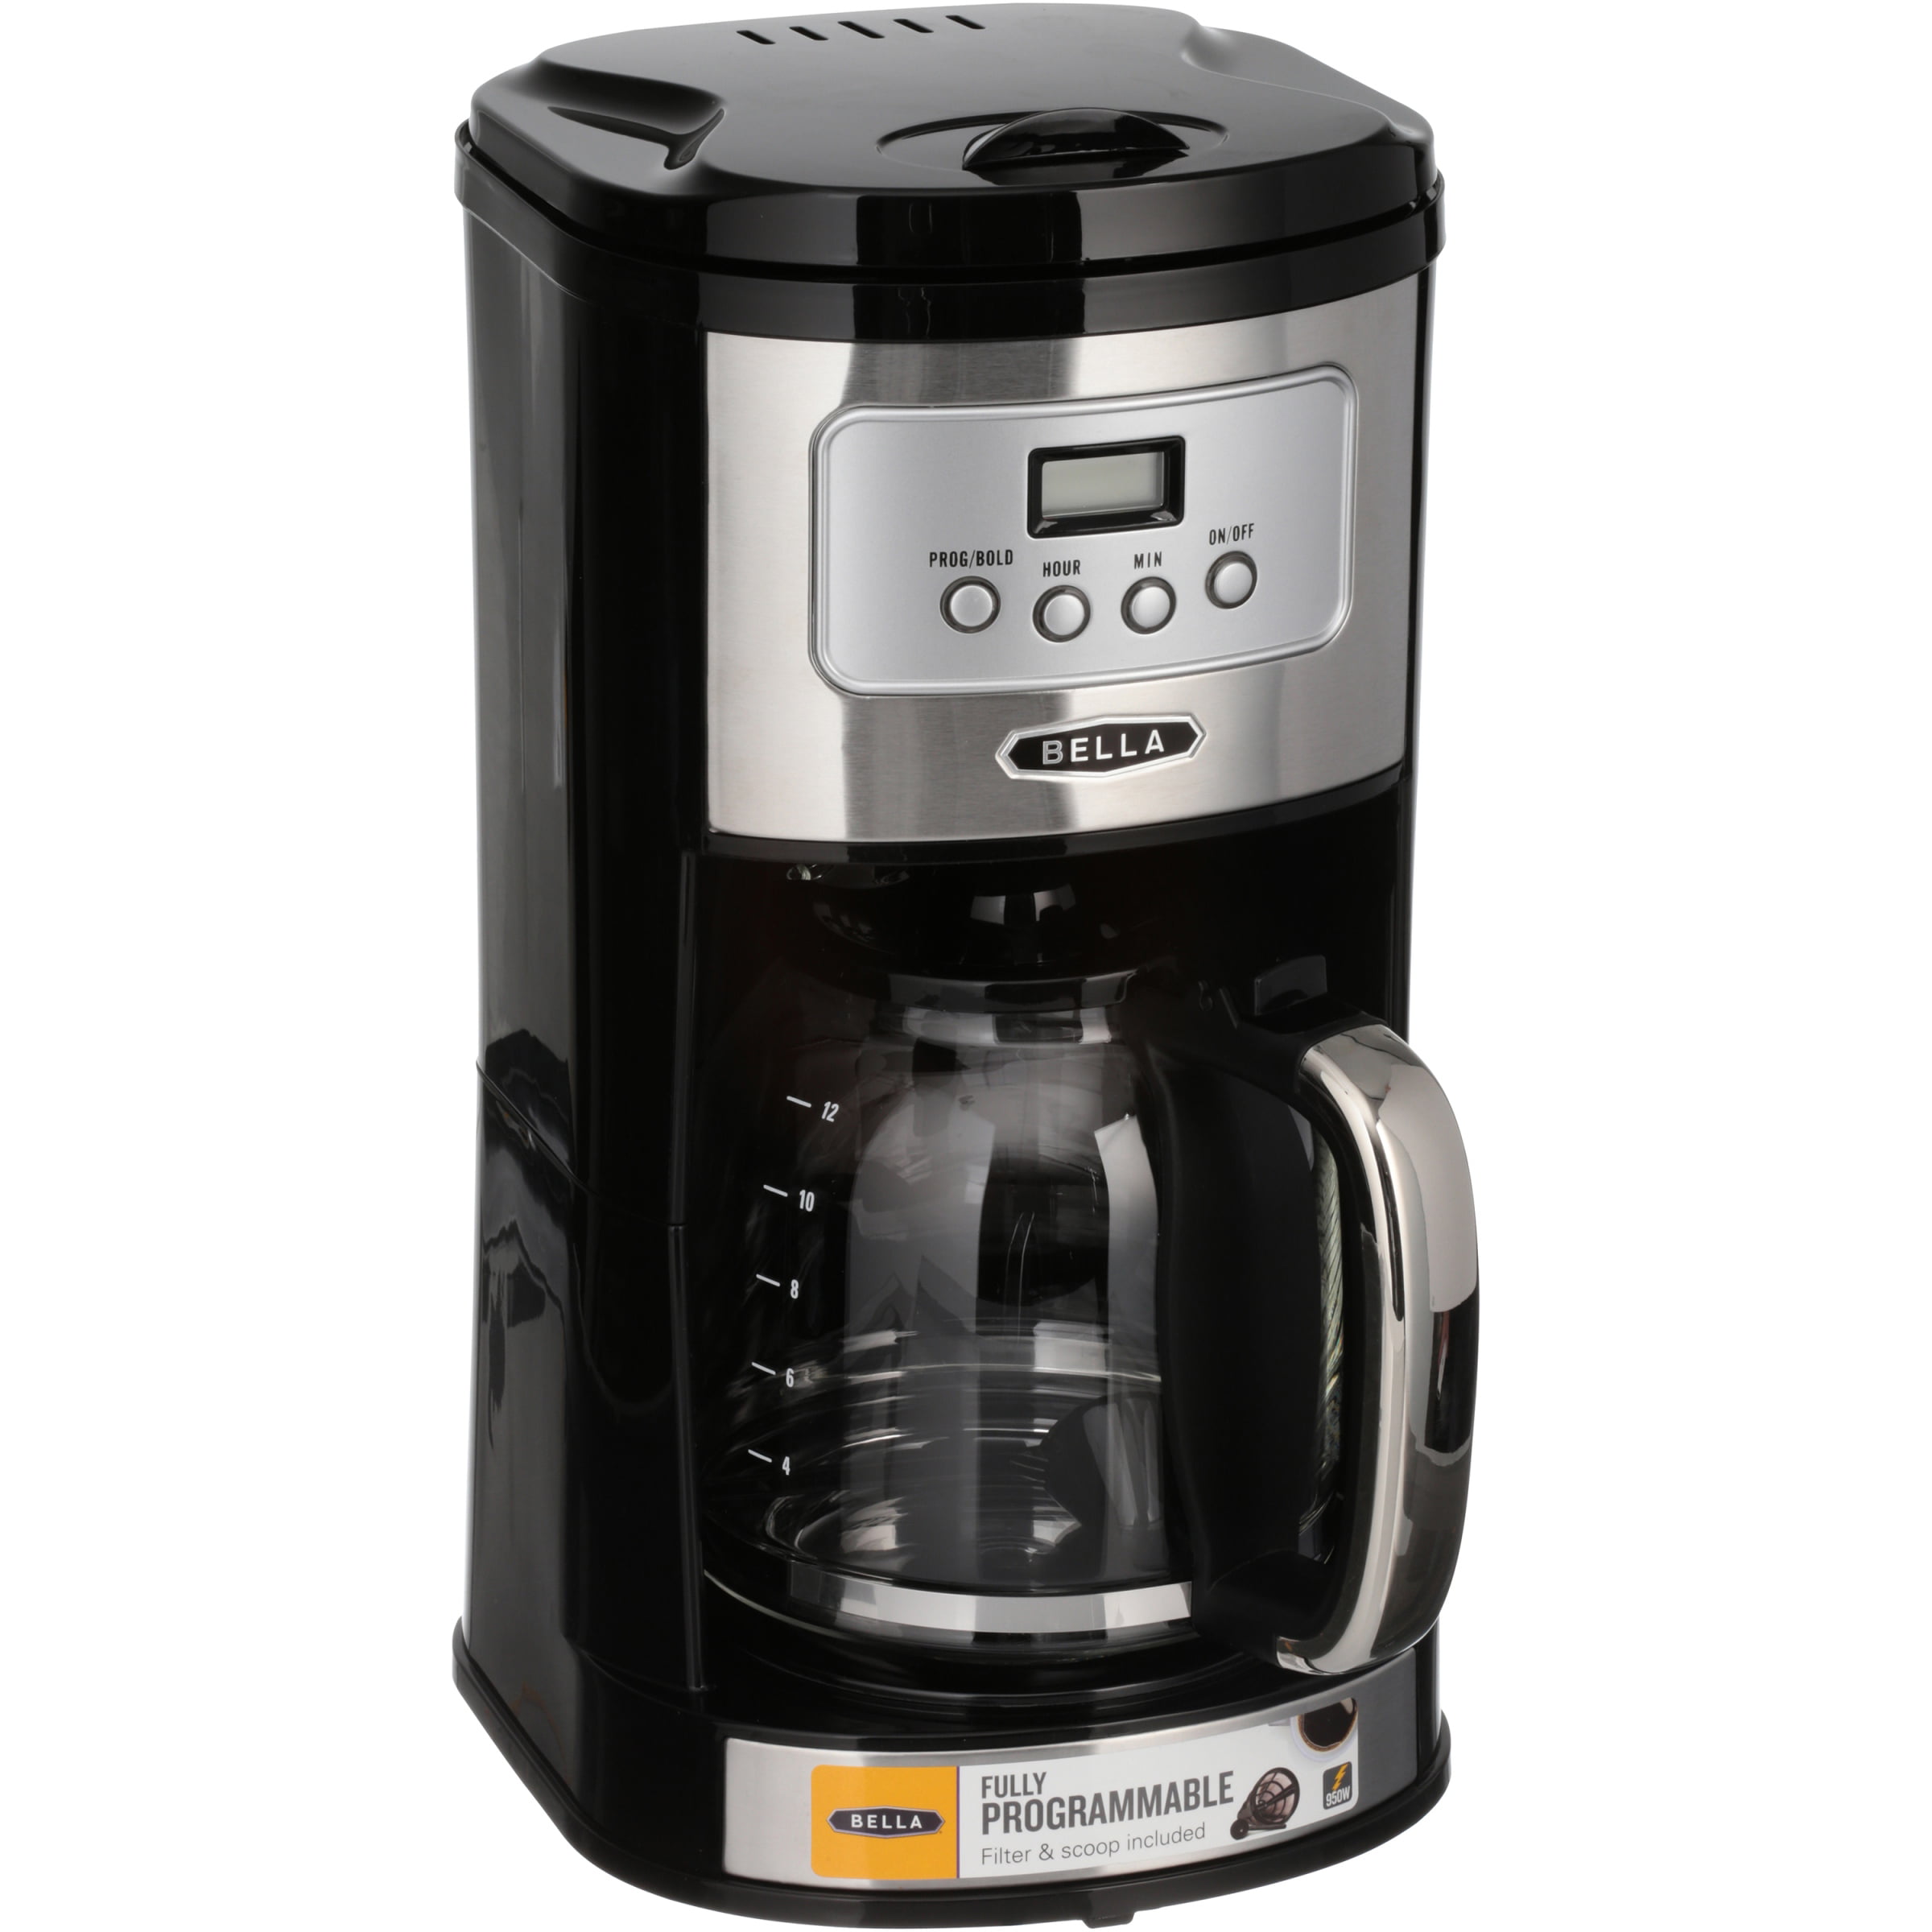 Cash USA Pawnshop. Bella Linea Collection 12-Cup Coffee Maker